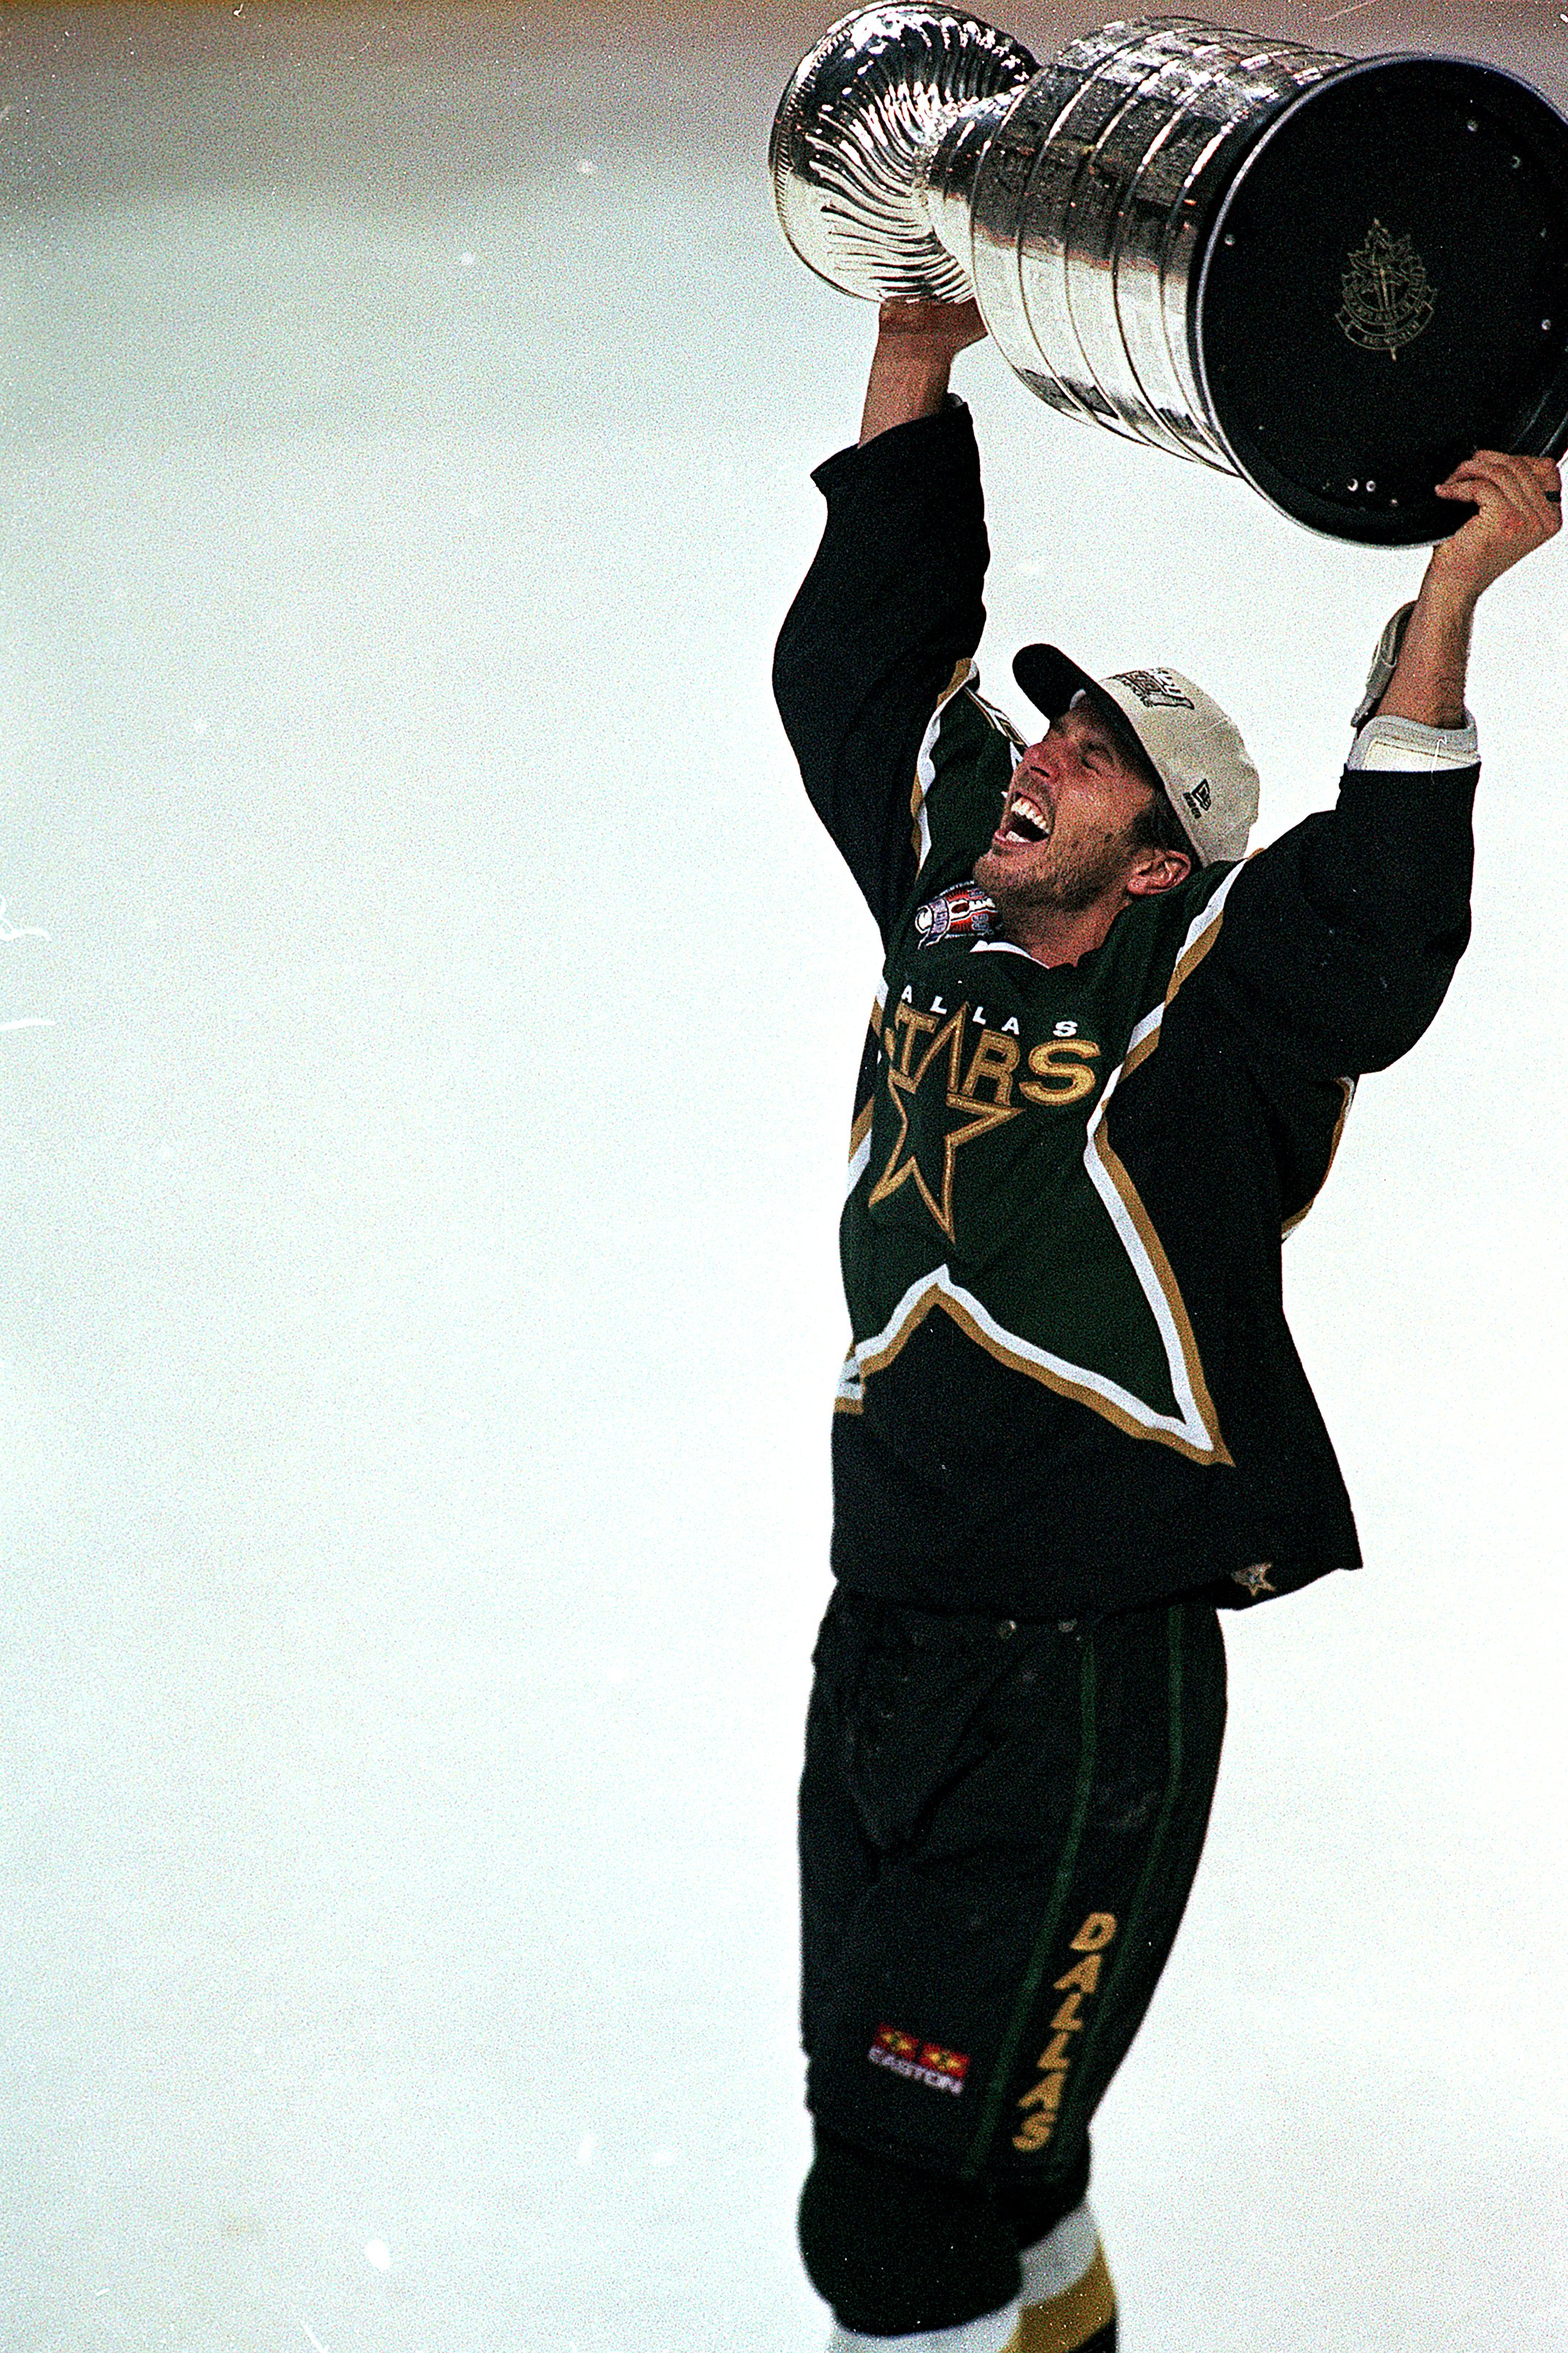 19 Jun 1999: Mike Modano #9 of the Dallas Stars carries the Stanley Cup on the ice after the Stanley Cup game against the Buffalo Sabres at the Marine Midland Arena in Buffalo, New York. The Stars defeated the Sabres 2-1 in triple overtime.